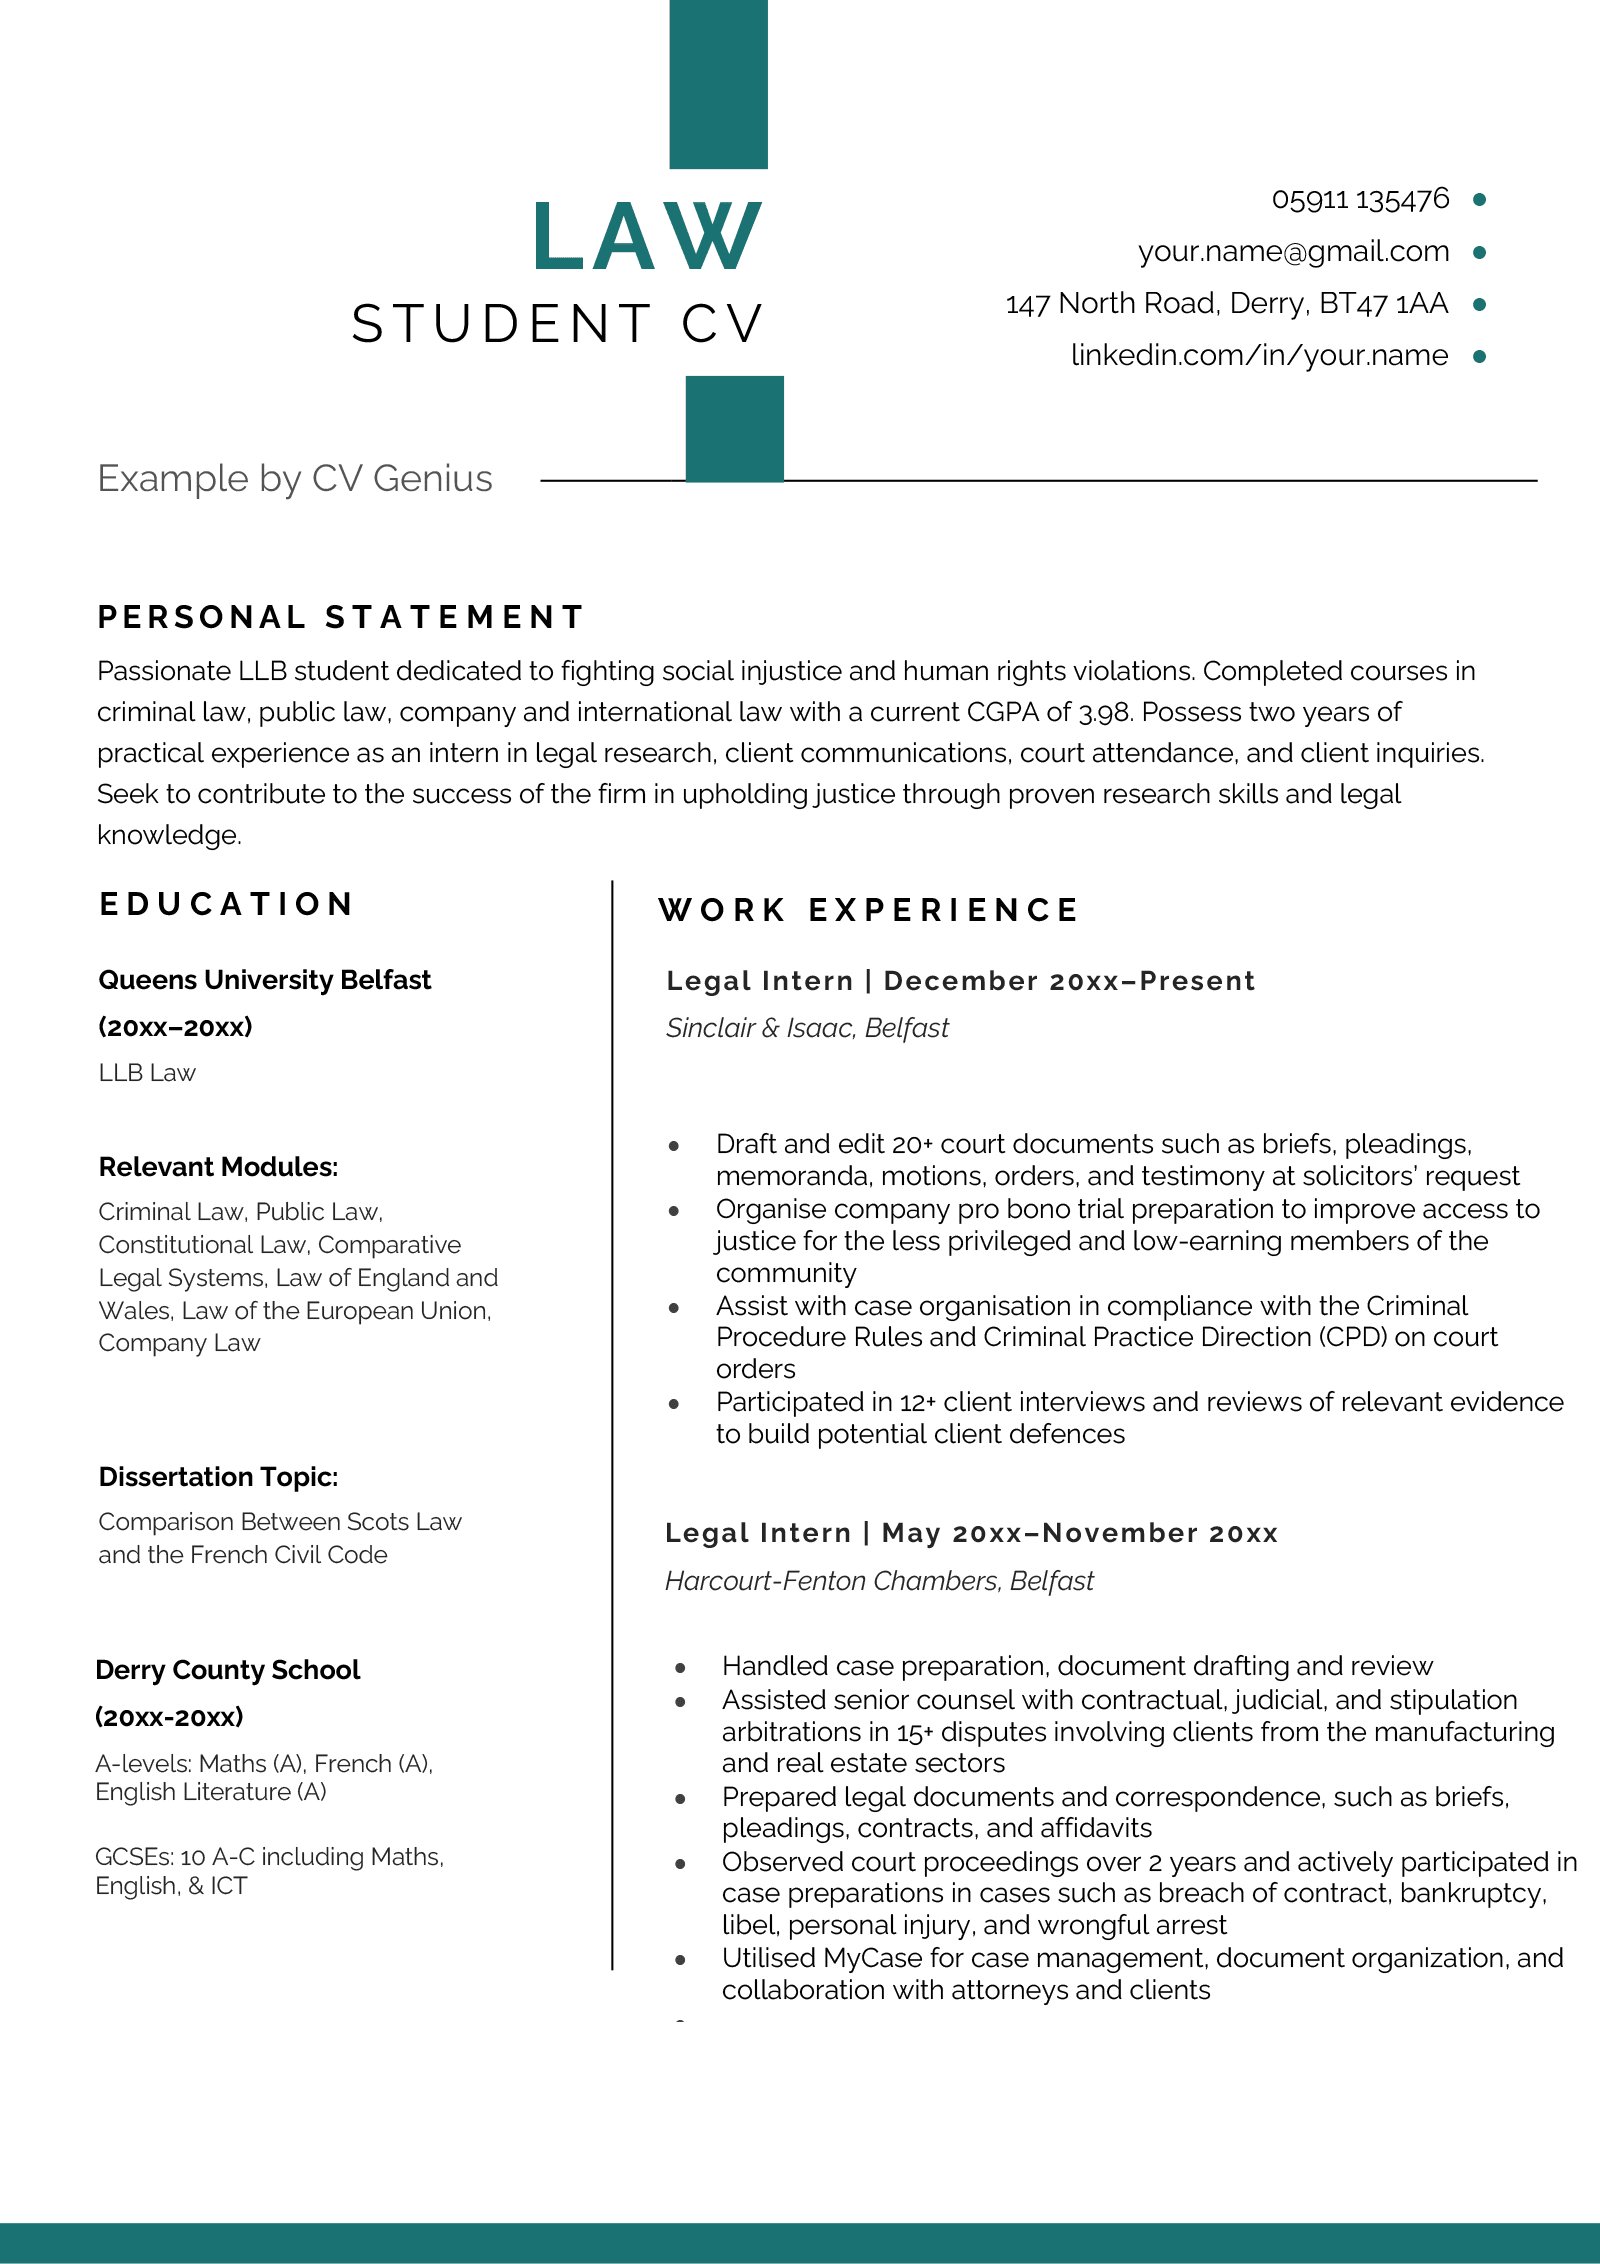 An example of a law student CV with a bold green header and a two-column layout that highlights the candidate's legal knowledge and relevant skills.